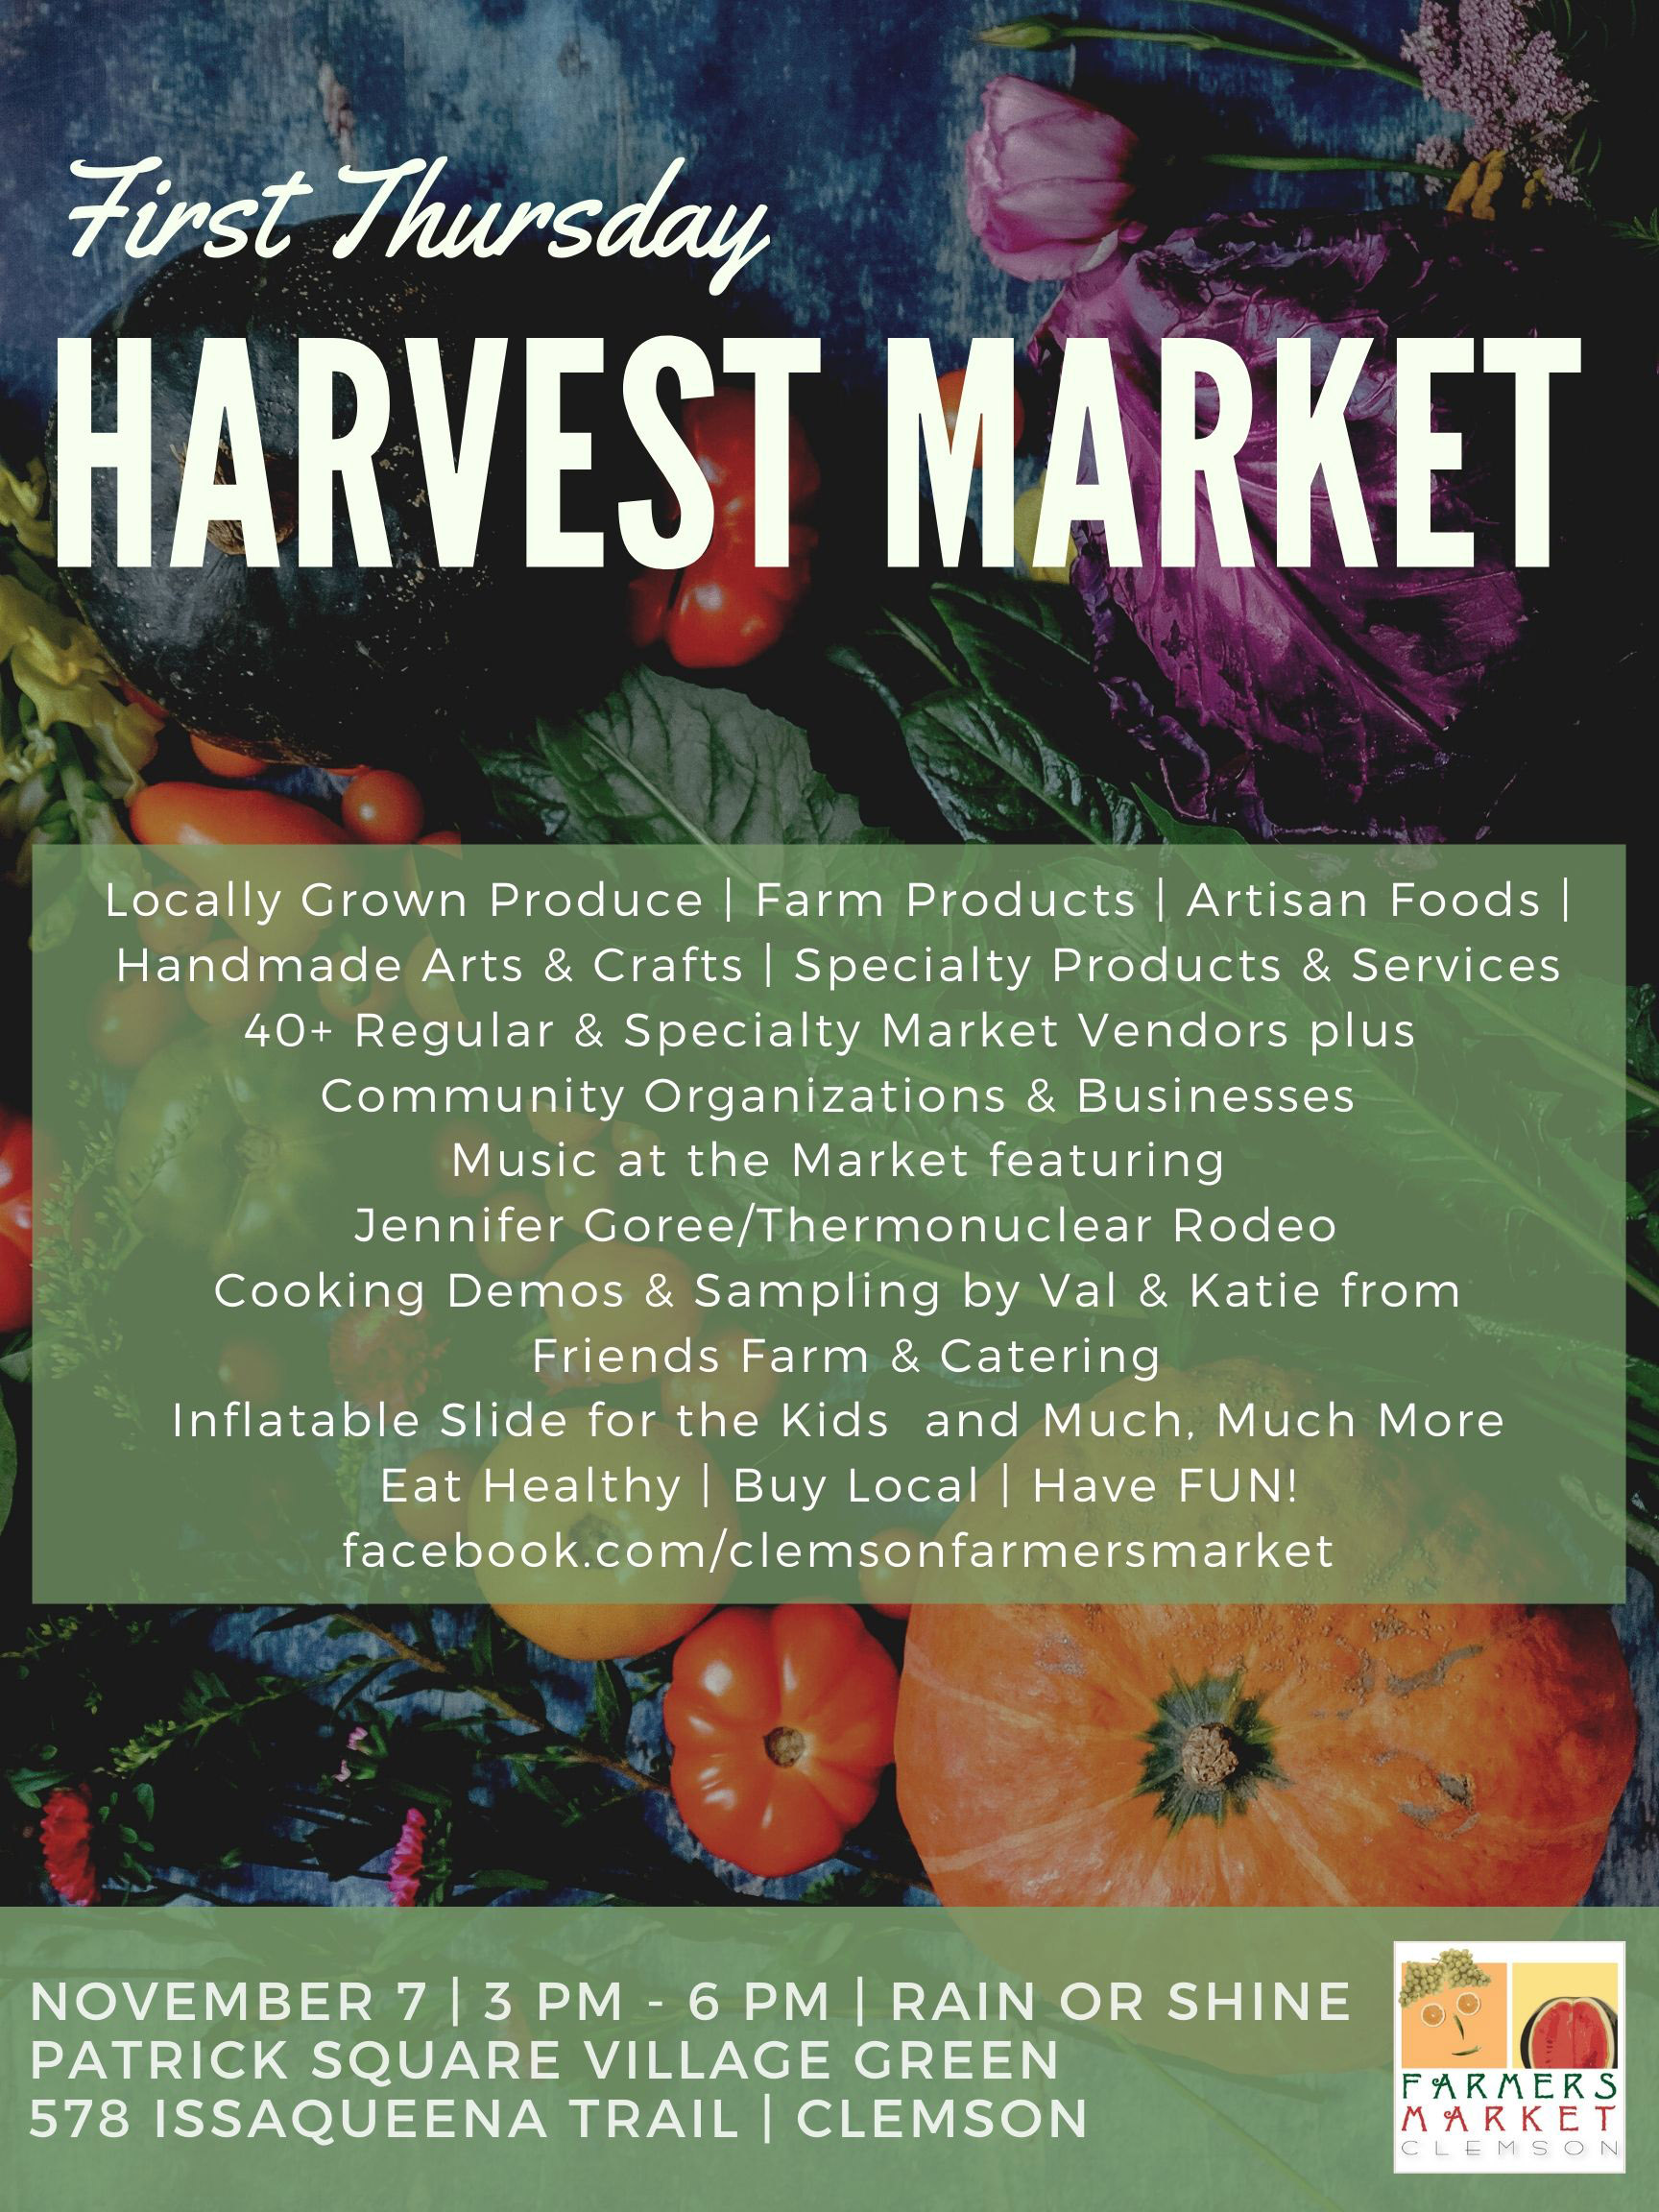 First Thursday Fall Harvest Market November 7th 3pm to 6pm